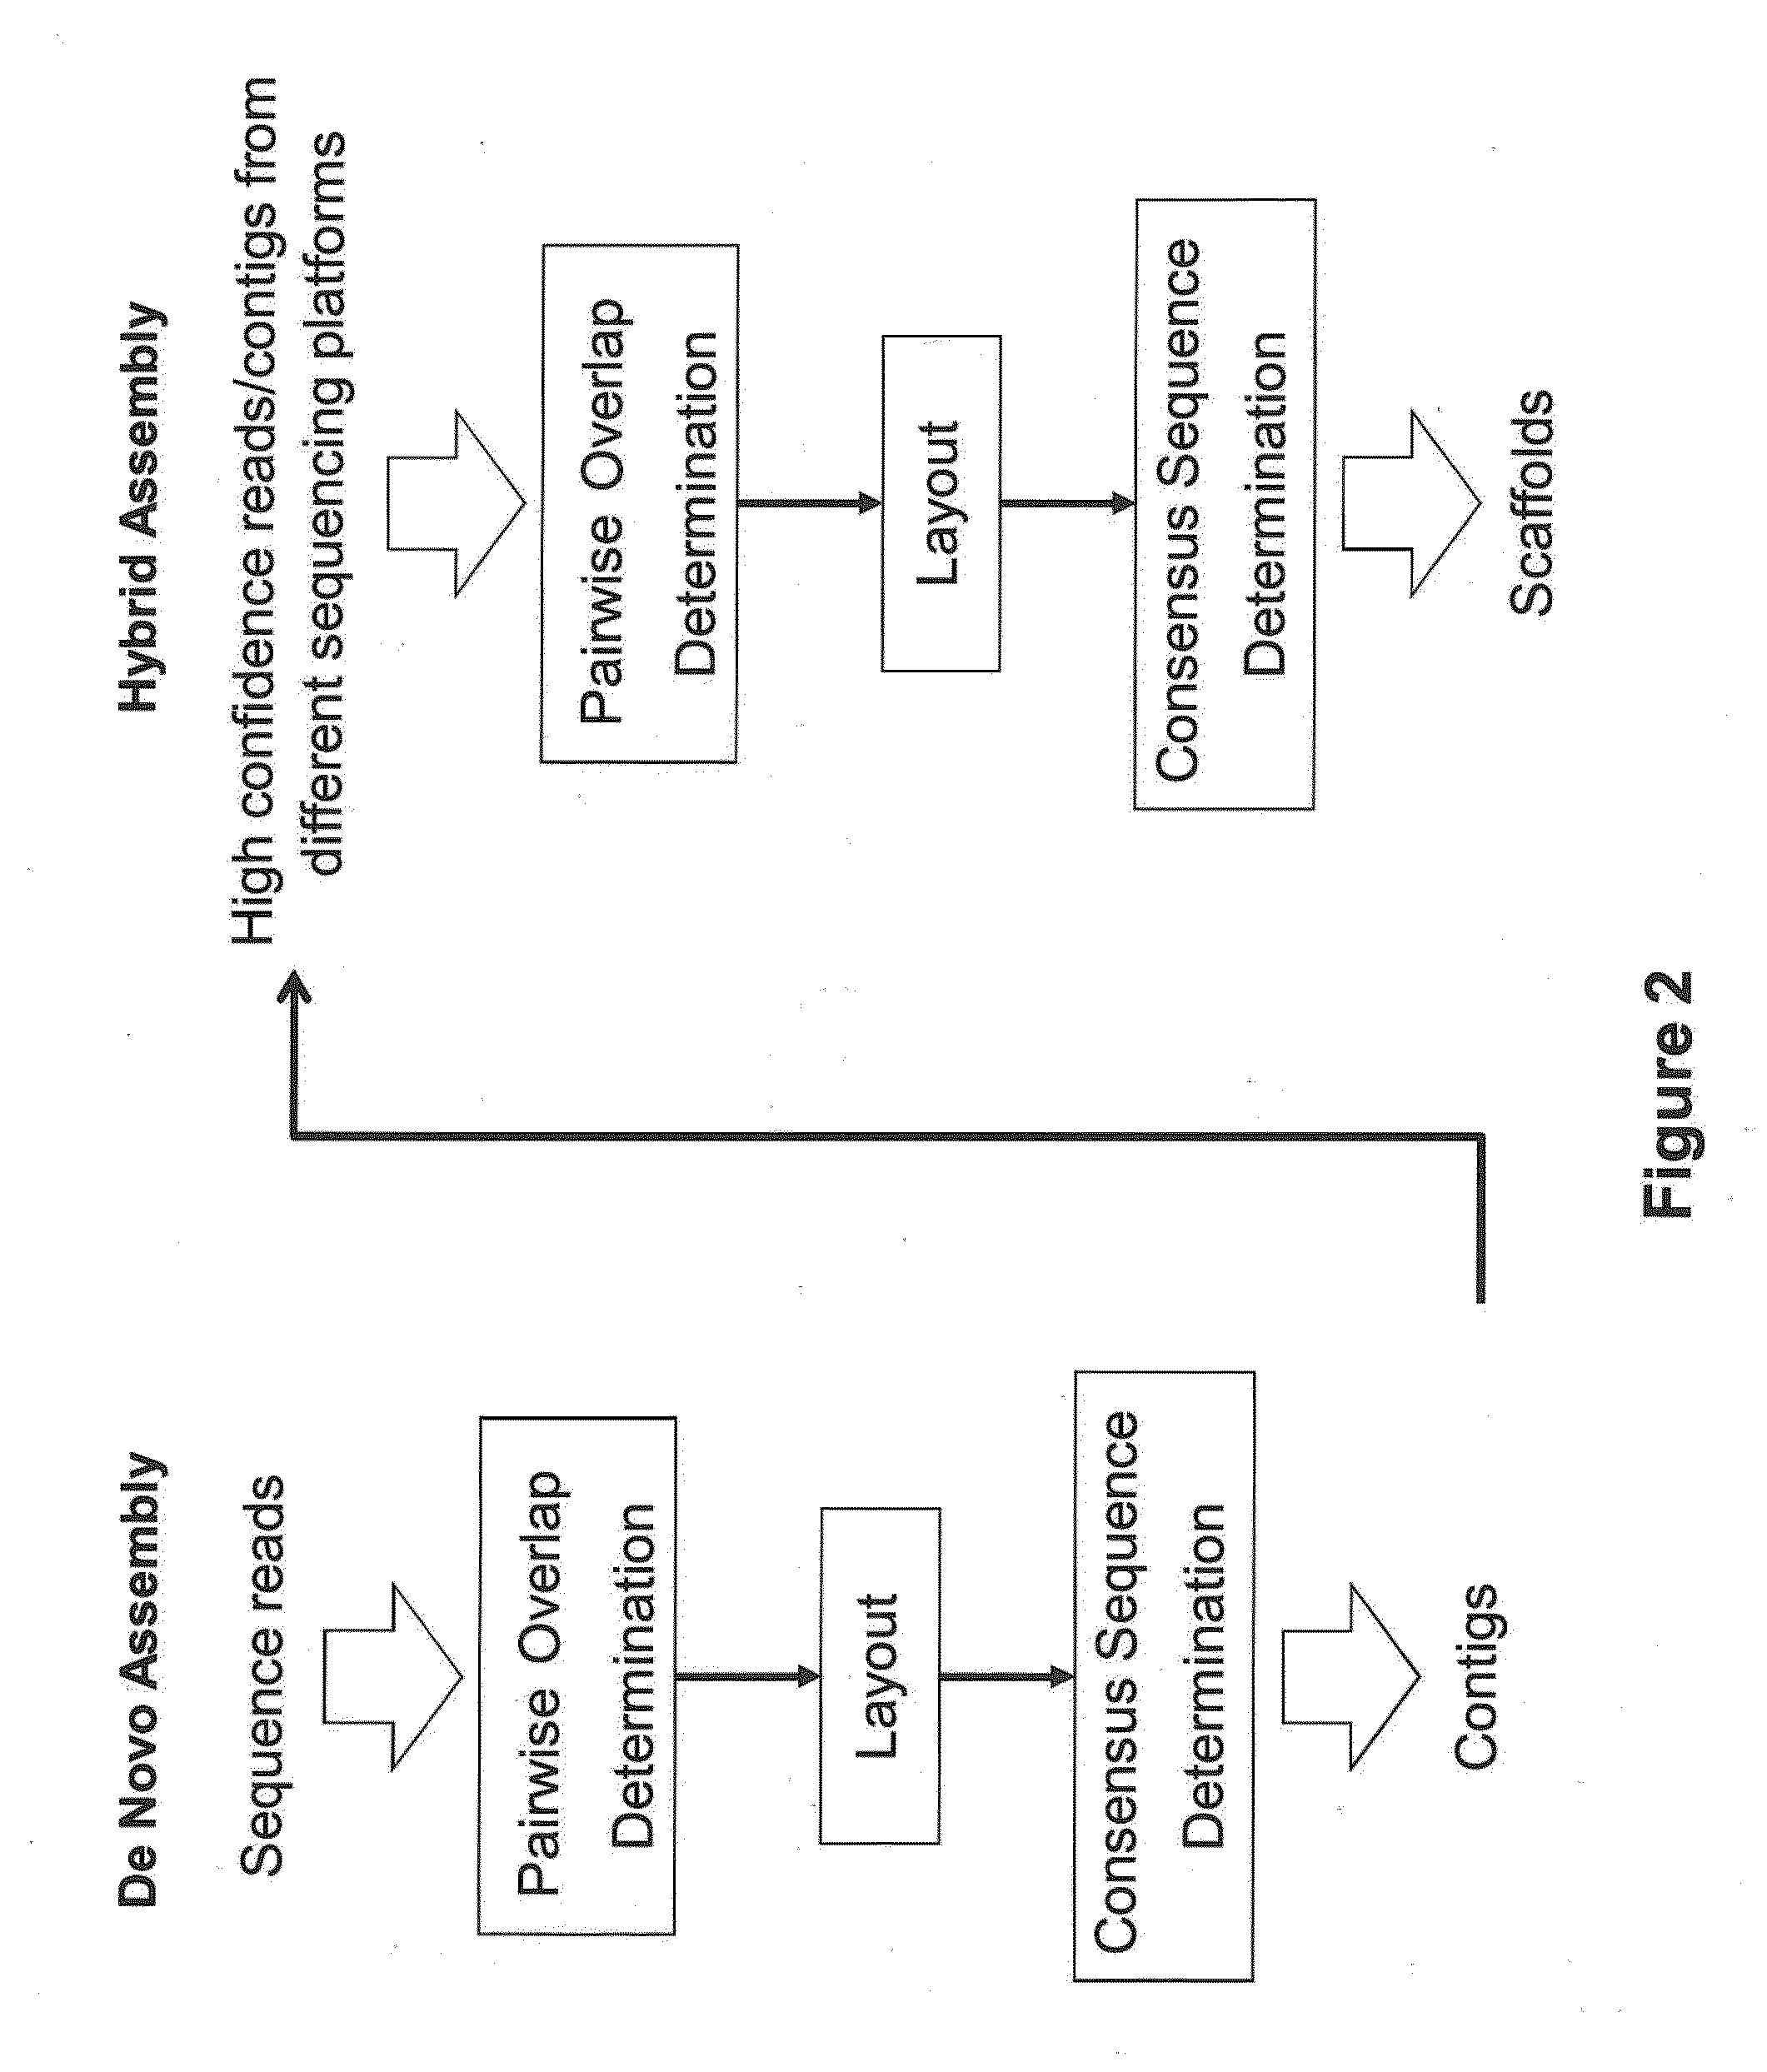 Sequence assembly and consensus sequence determination